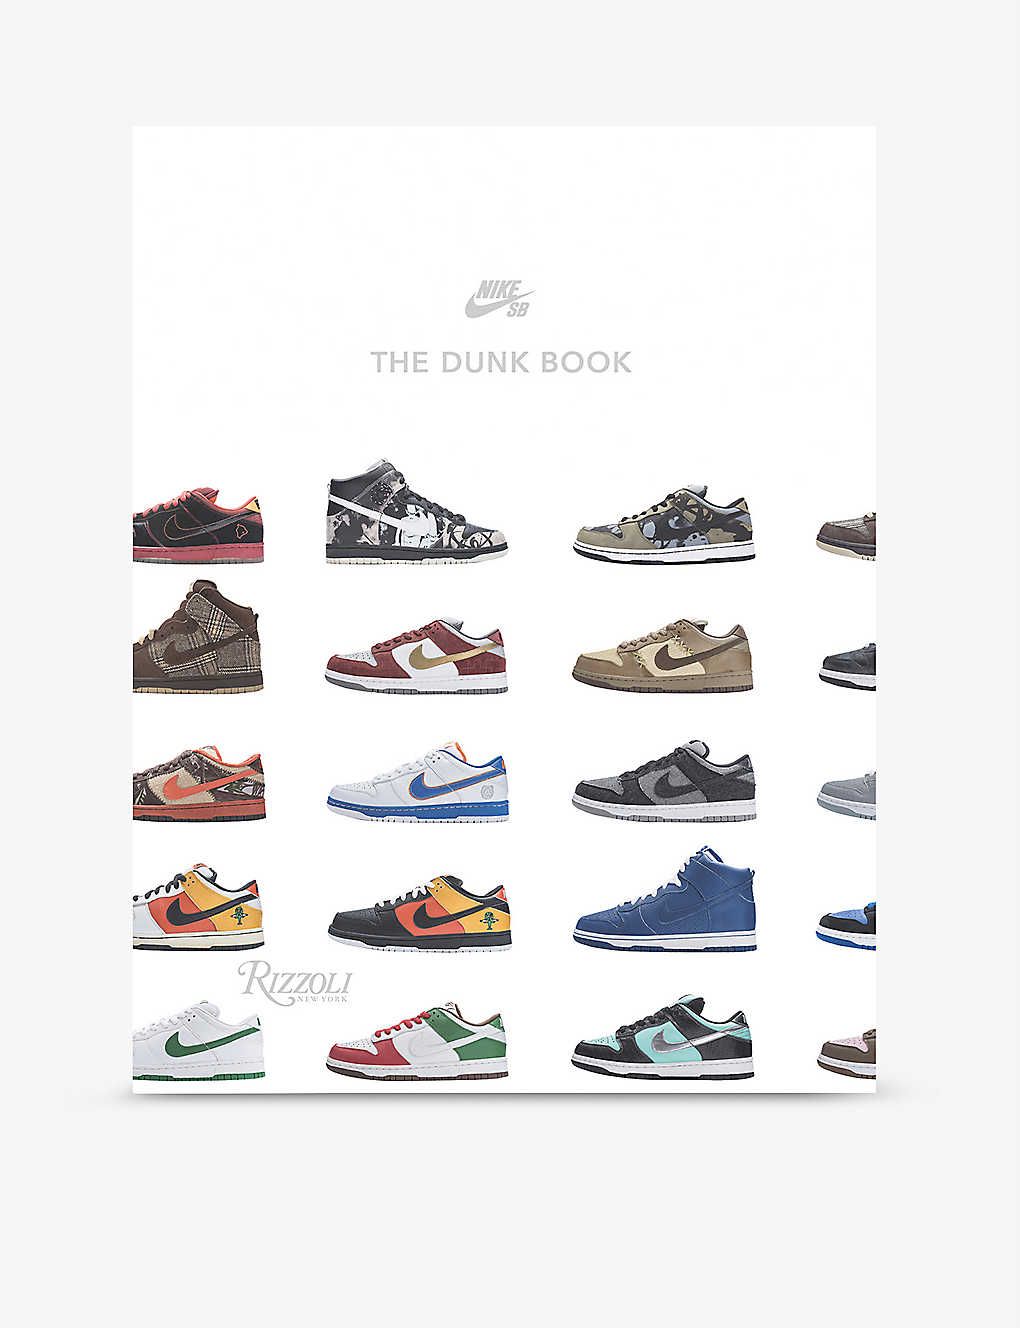 RIZZOLI ザ・ダンク ブック The Dunk book